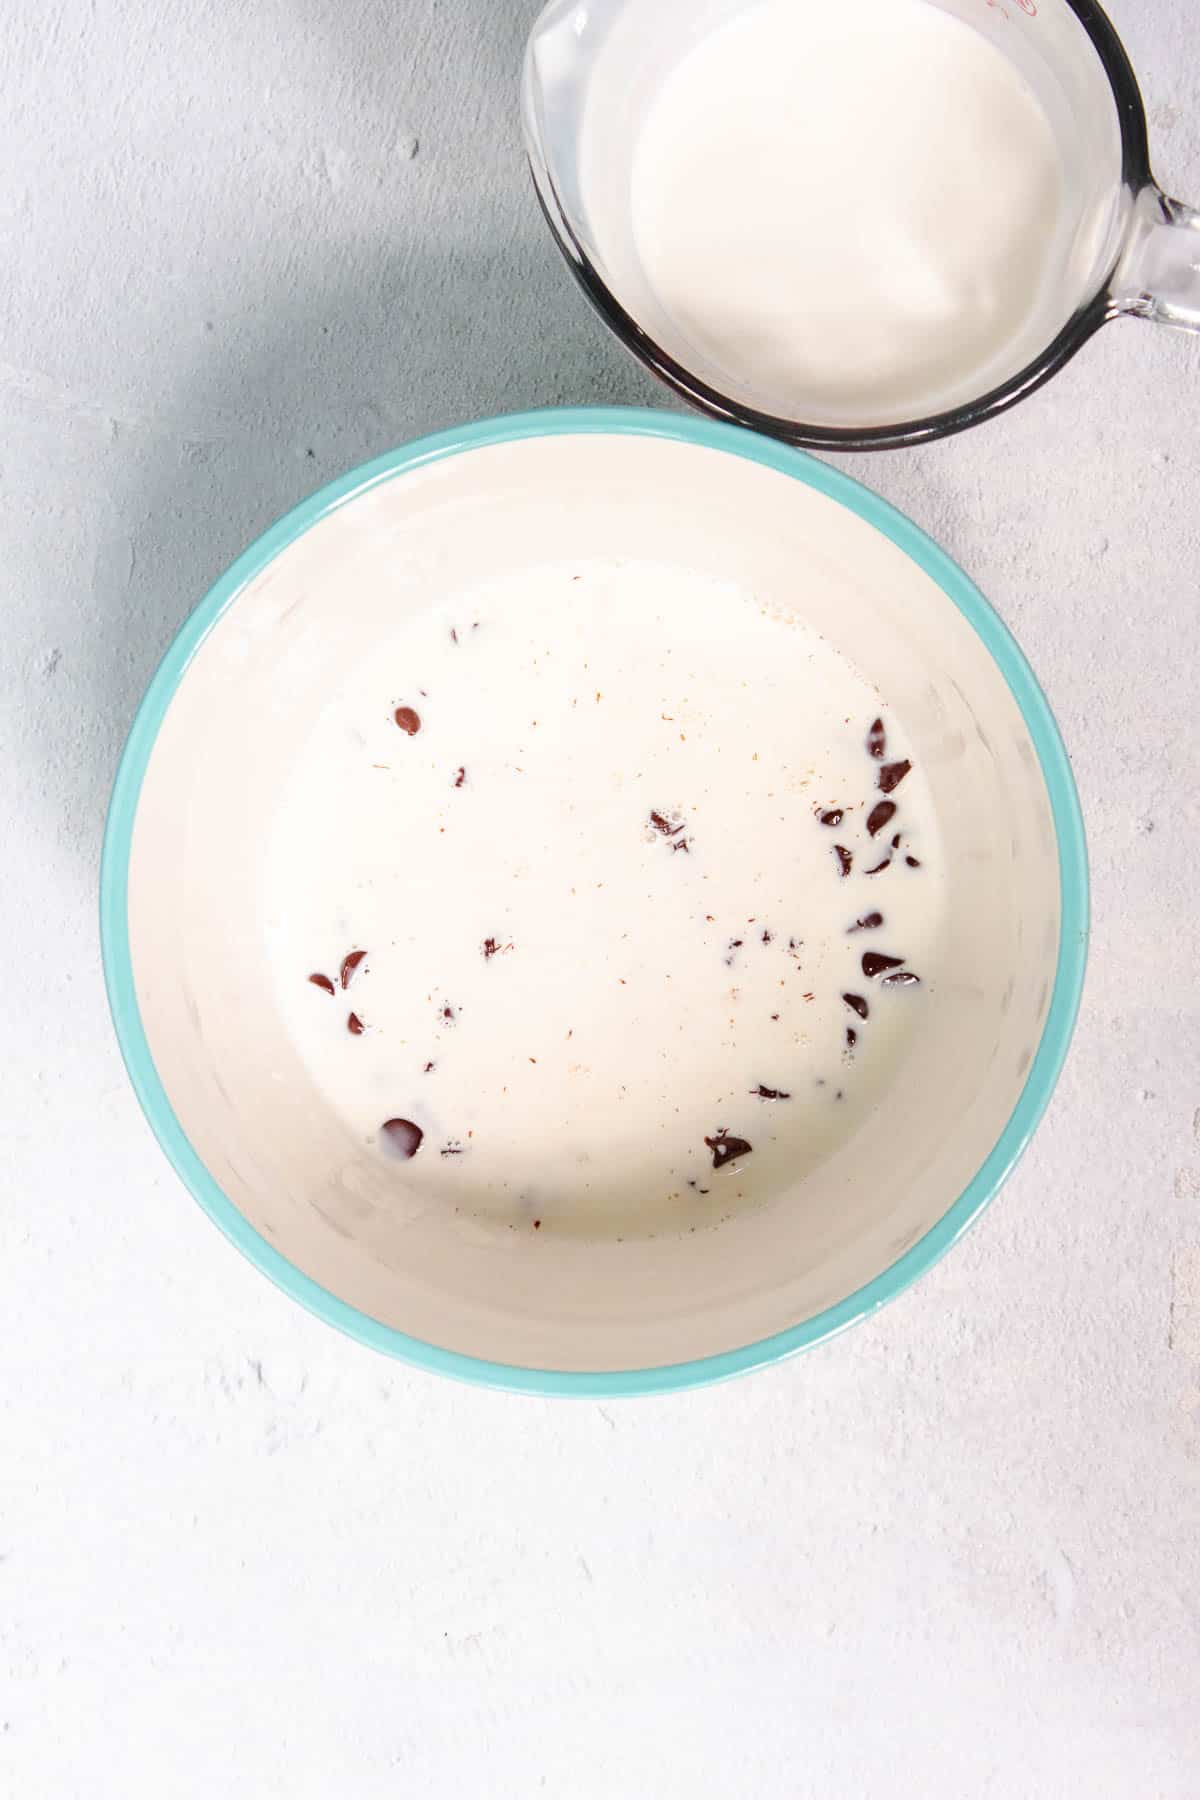 Chocolate chips are submerged in warm heavy cream